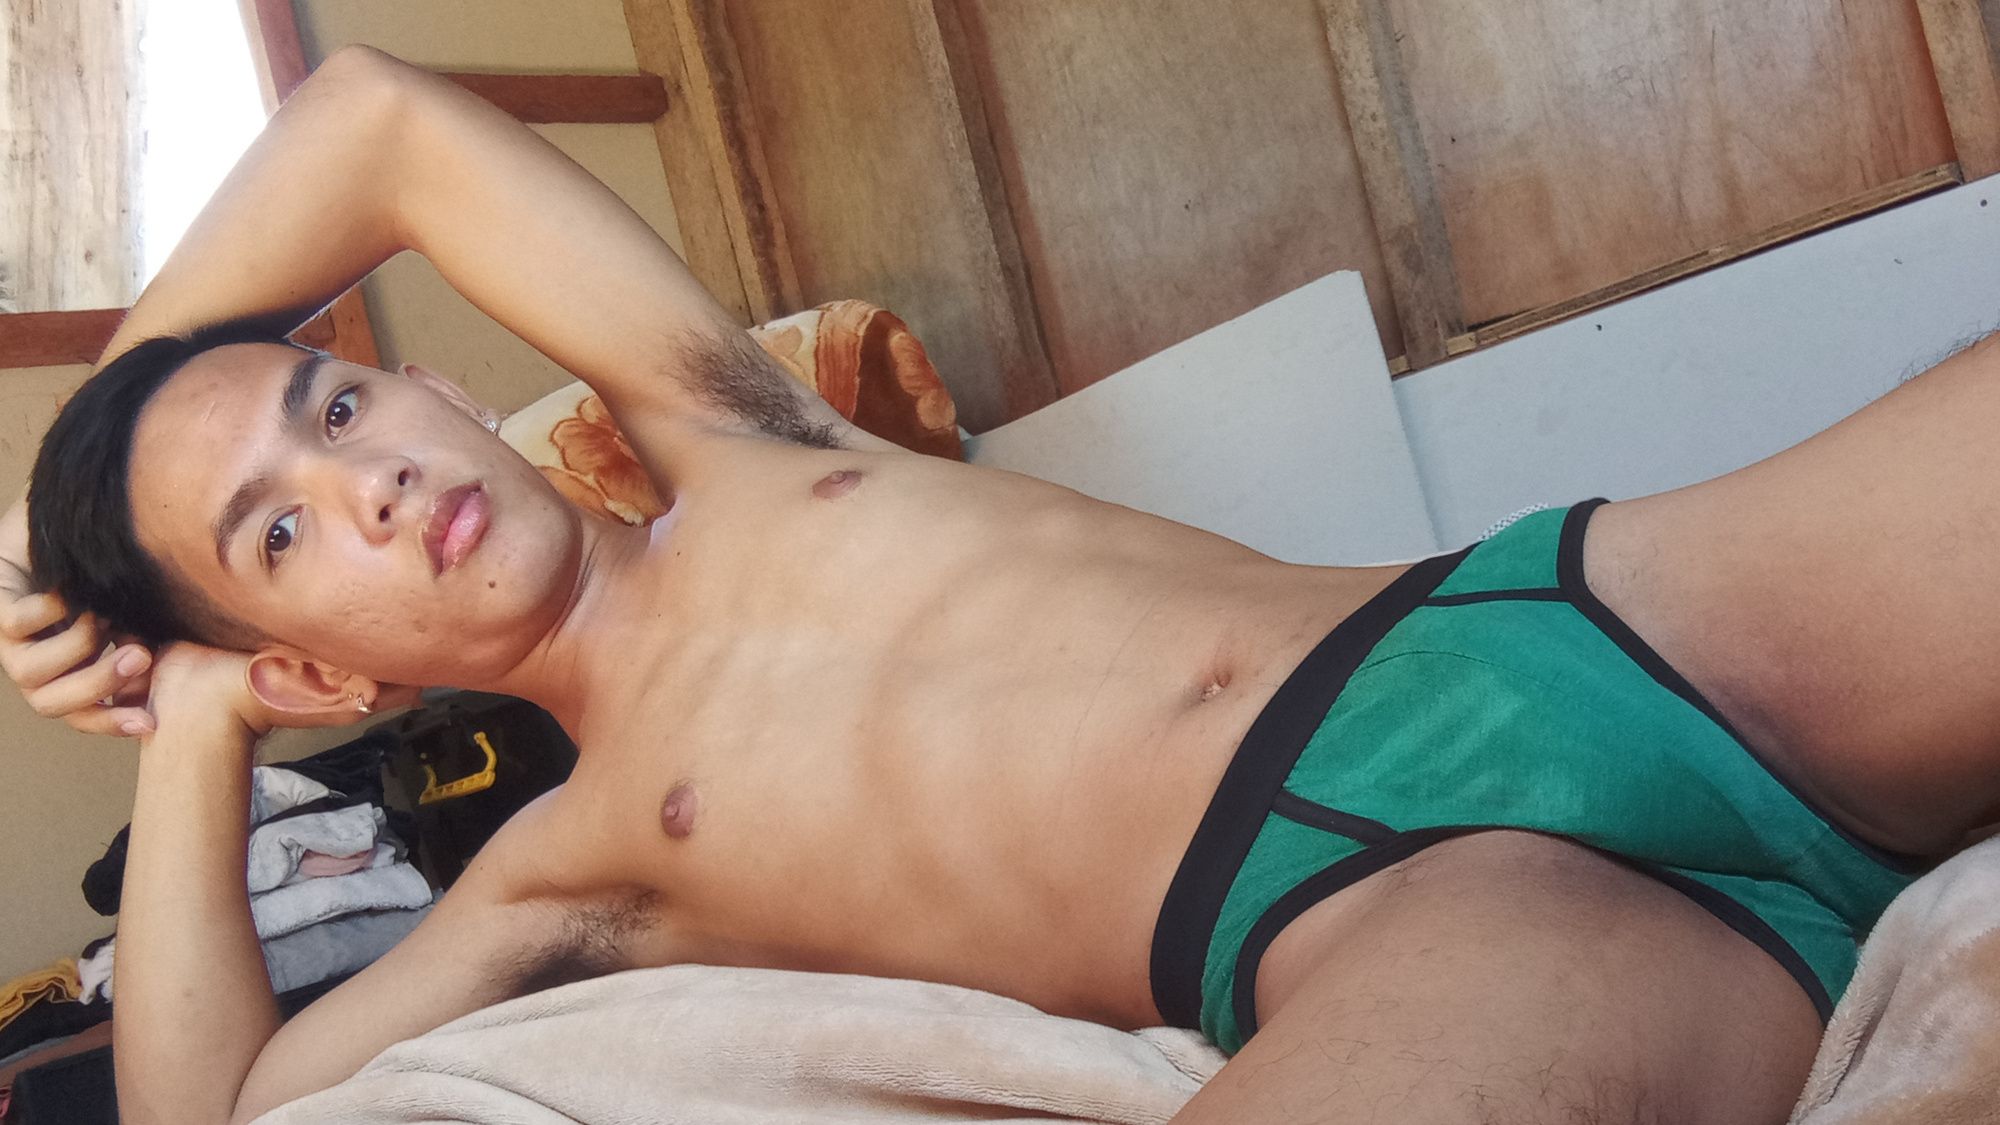 Muscled asian twink spreads his furry legs in bed #6